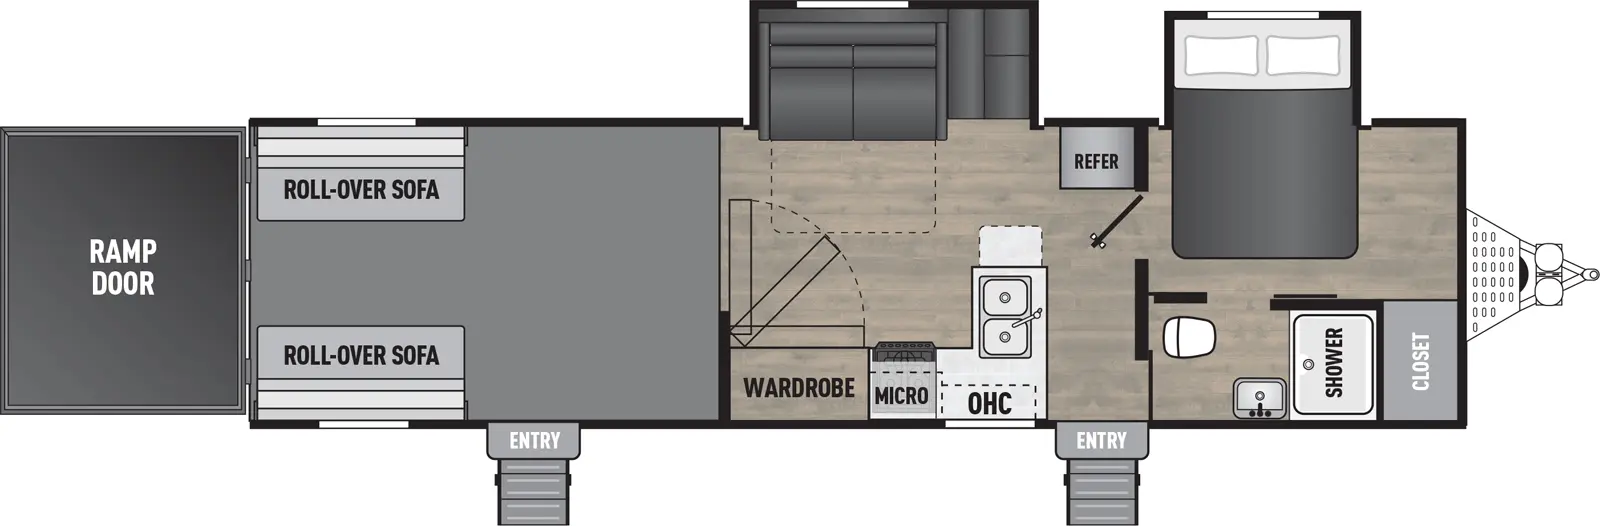 The 30GS has two slideouts, two entries, and a rear ramp door. Interior layout front to back: front off-door side bed slideout, and door side closet and full pass-through bathroom; off-door side refrigerator and slideout with seating; door side entry, peninsula kitchen counter with sink, overhead cabinet, microwave, cooktop and hidden wardrobe; rear garage with second entry, opposing roll-over sofas, and rear ramp door.